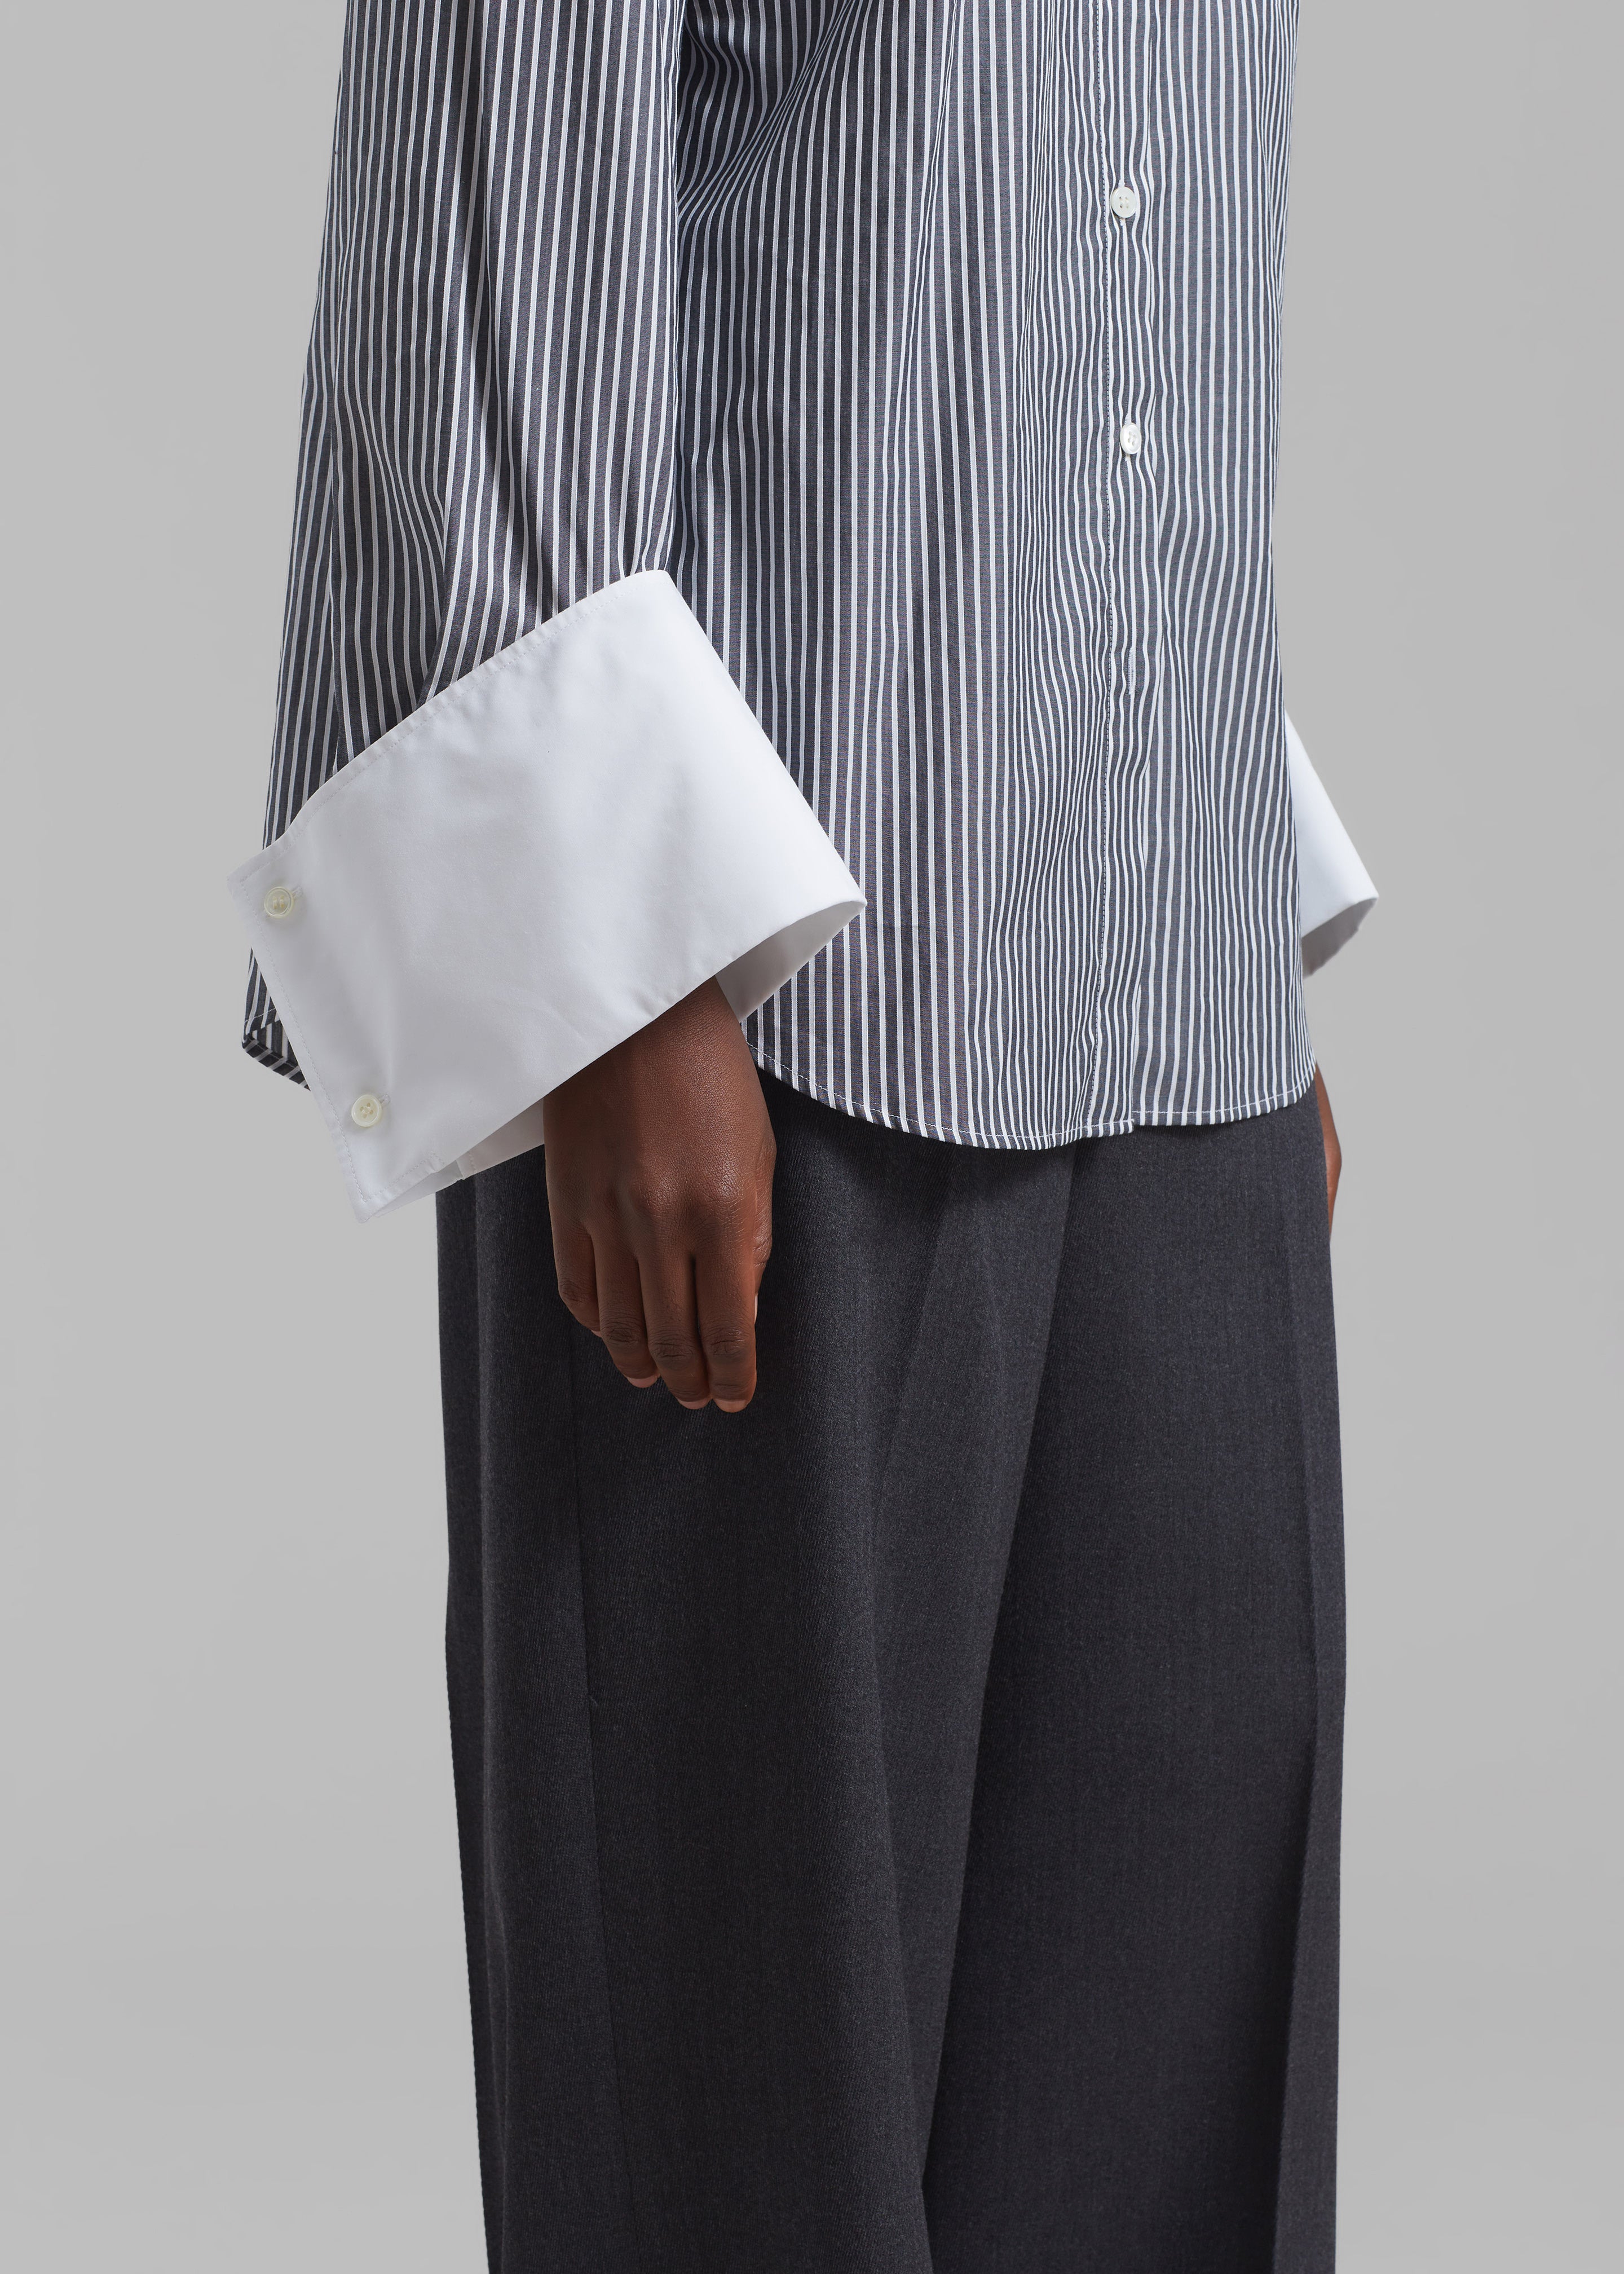 JW Anderson Oversized Cuff Shirt - Charcoal/White – The Frankie Shop